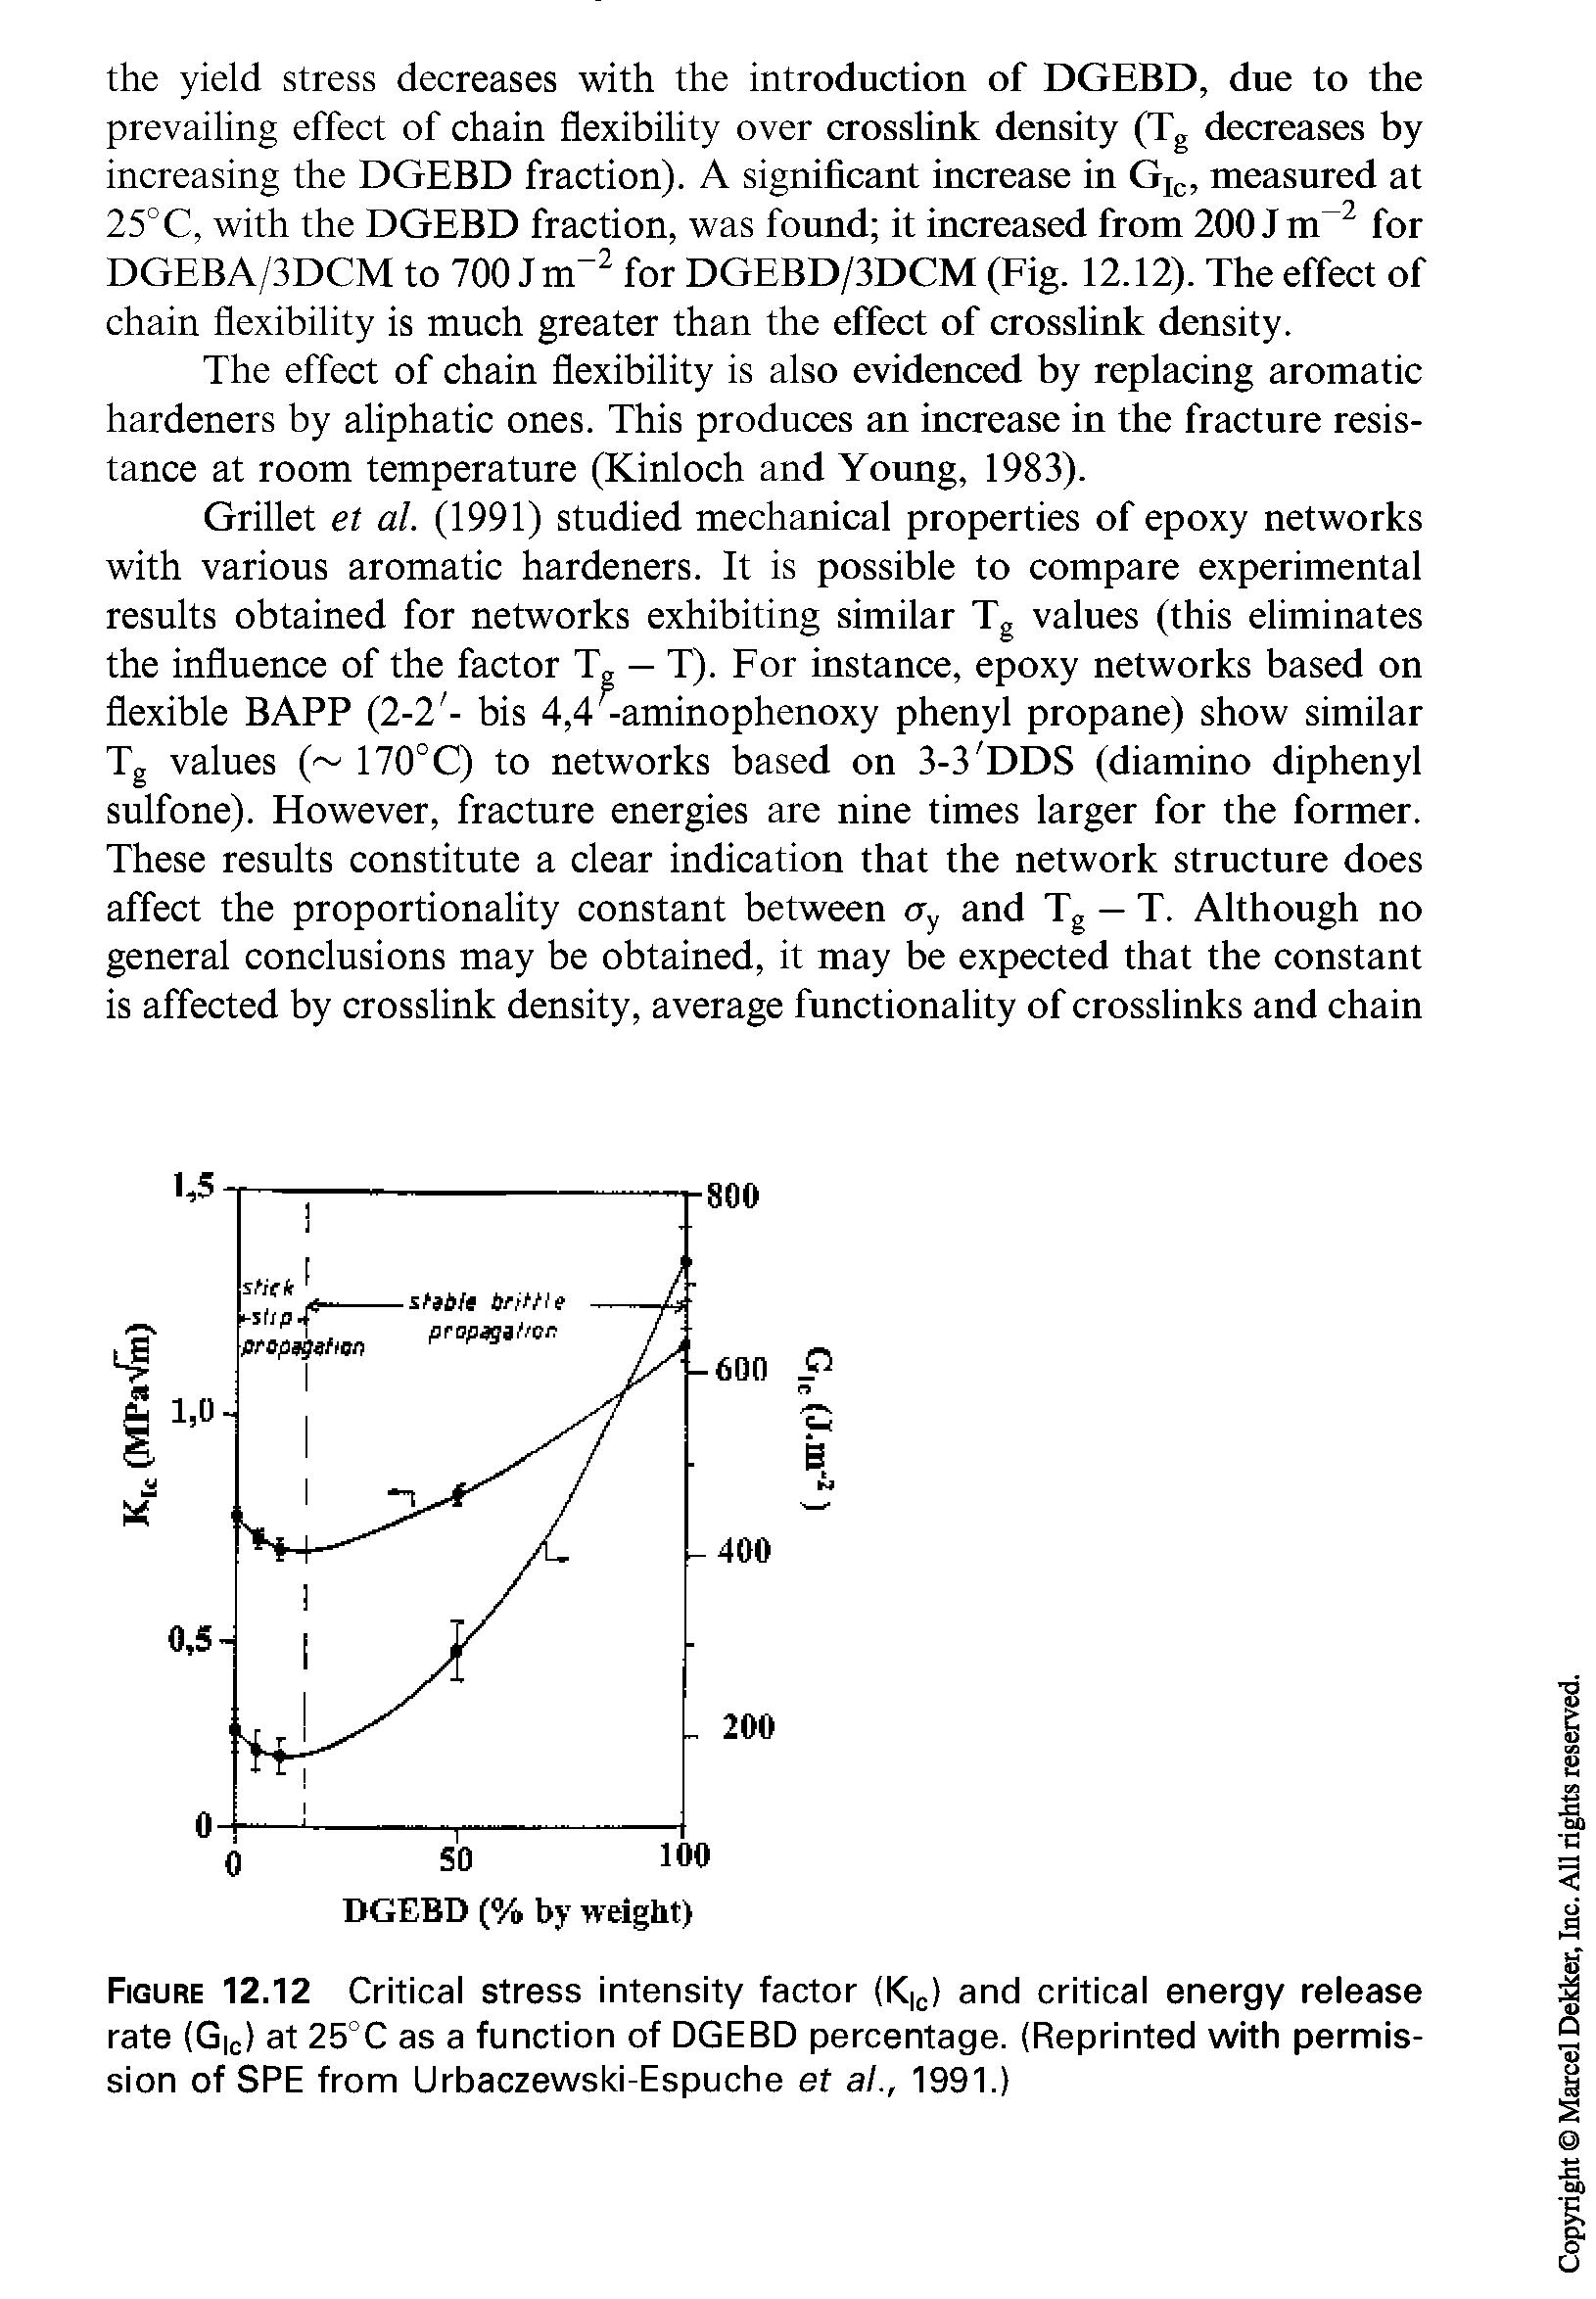 Figure 12.12 Critical stress intensity factor (K C) and critical energy release rate (G C) at 25°C as a function of DGEBD percentage. (Reprinted with permission of SPE from Urbaczewski-Espuche et al., 1991.)...